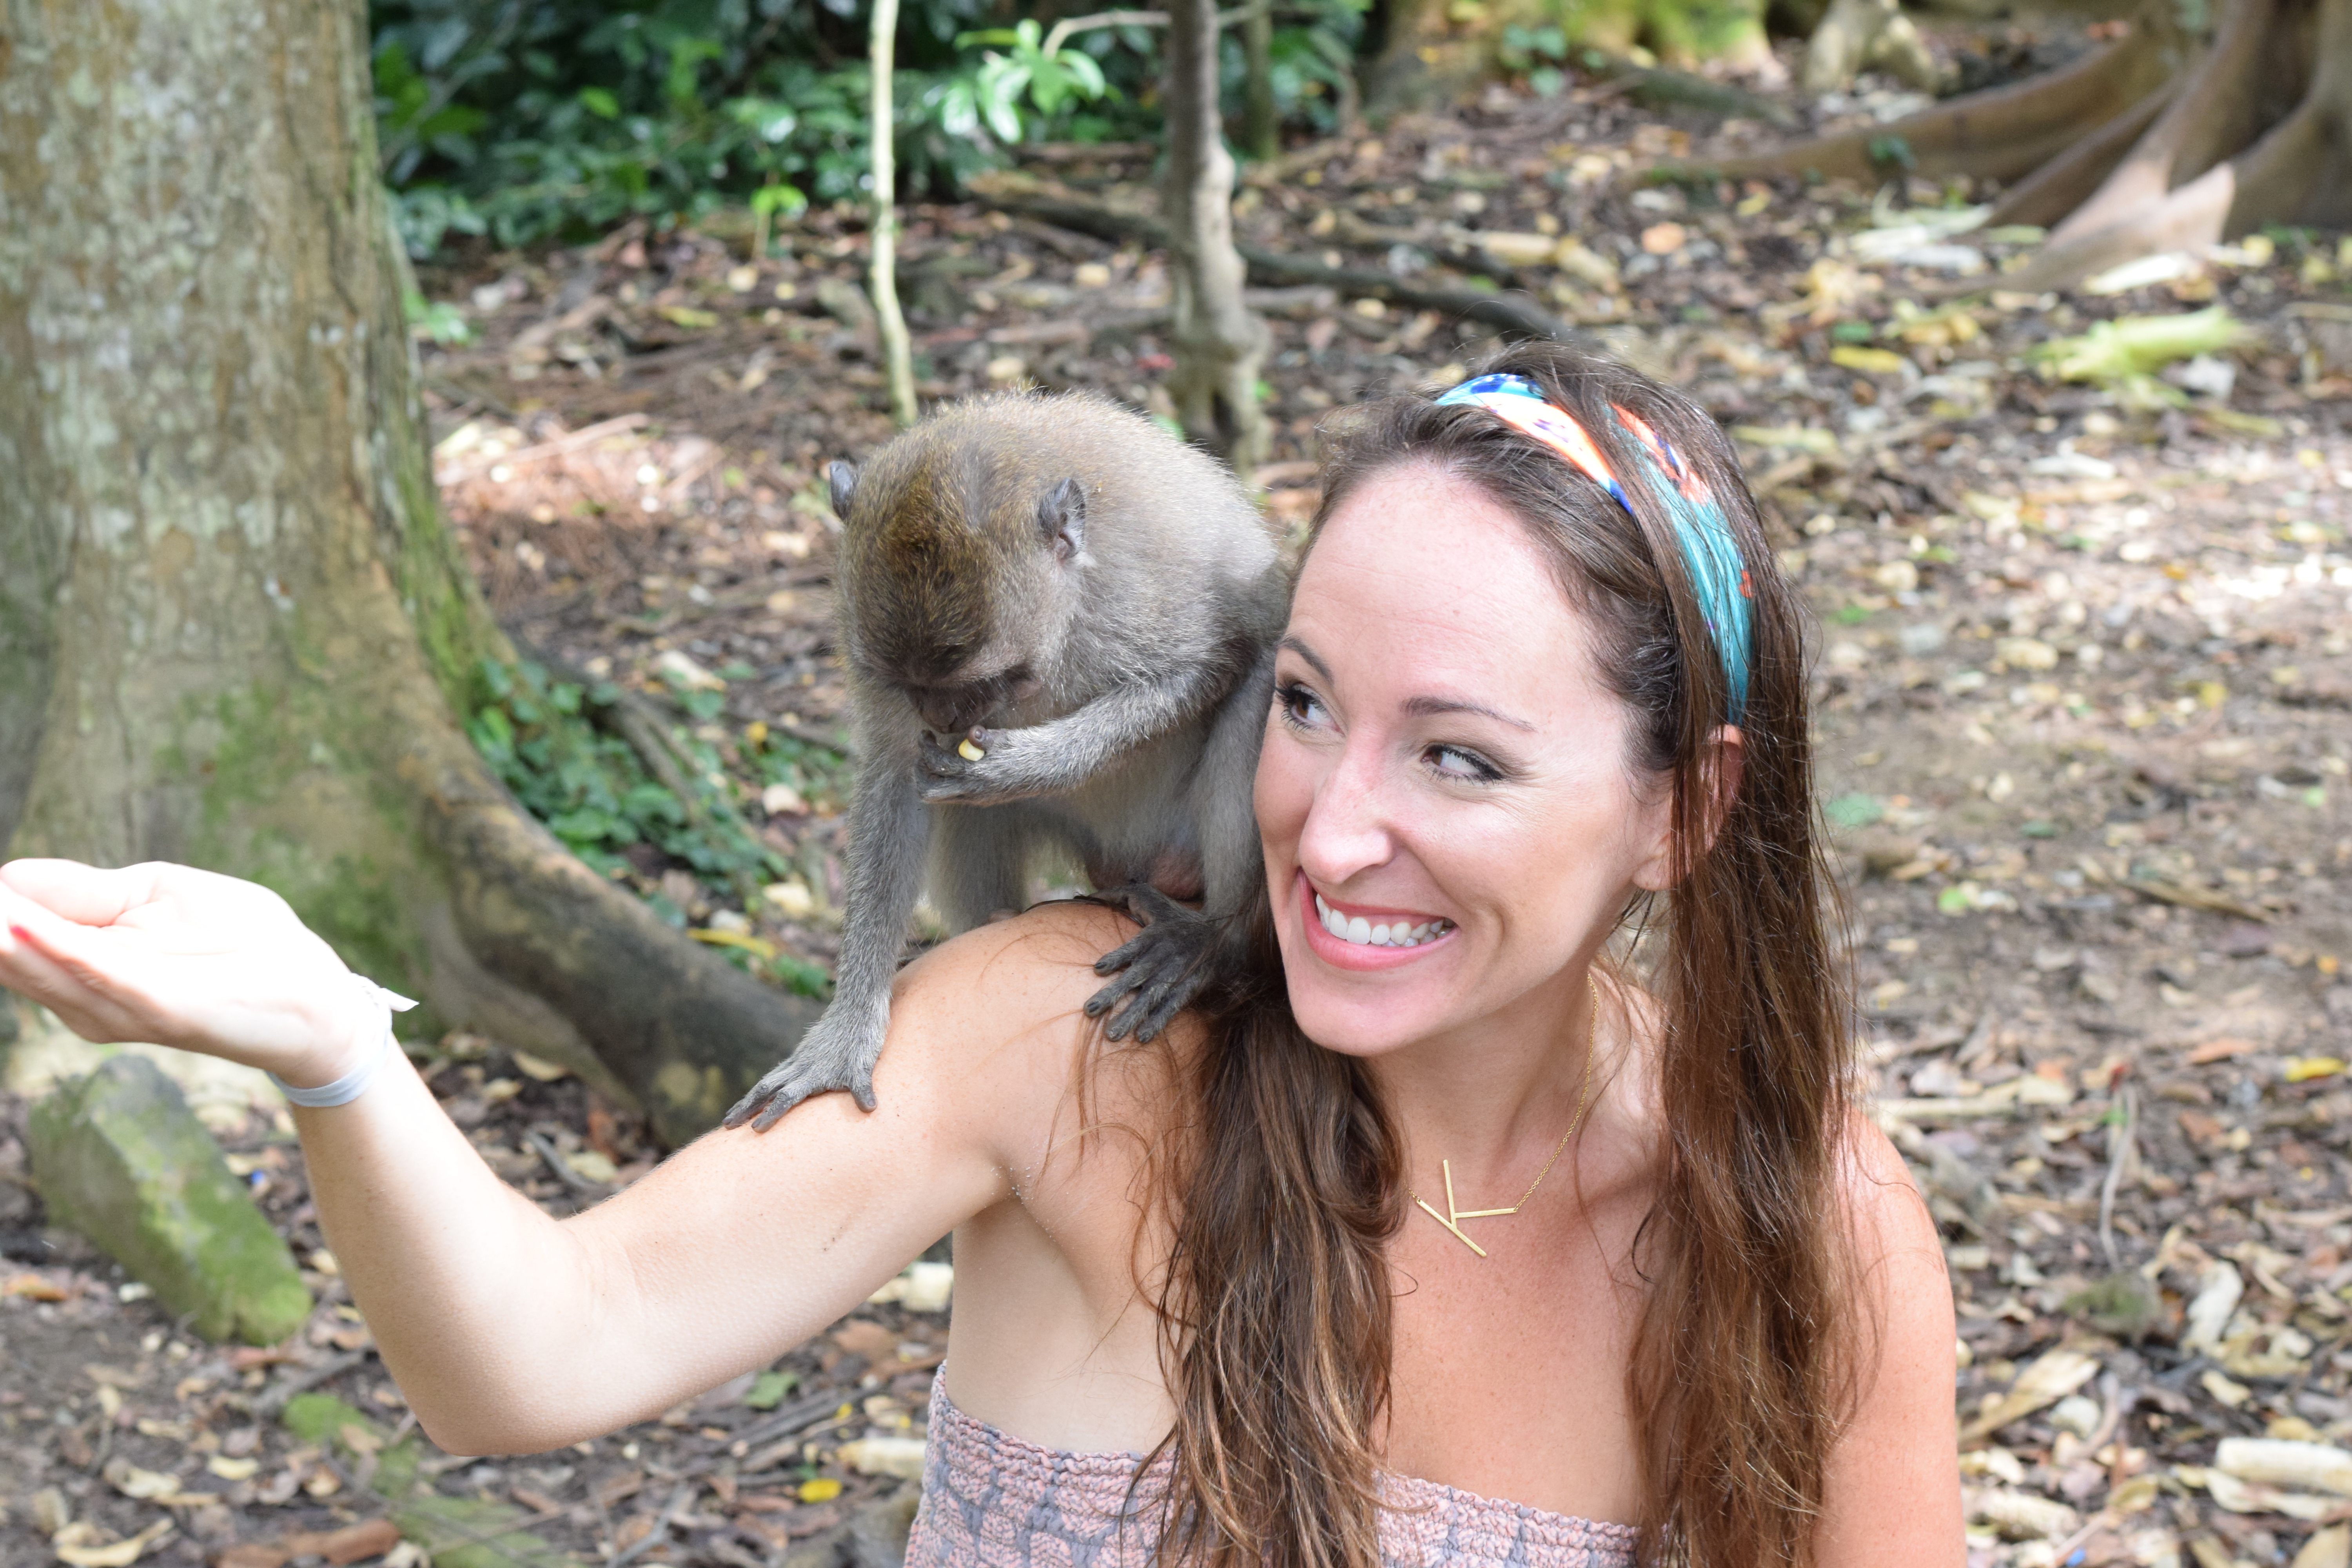 Monkey Sanctuary + Forest Ubud, Bali, Indonesia - Our Bali Trip - 12 Things You Can't Miss In Ubud Bali - Ubud Bali - Ubud Monkey Forest - Ubud Travel Blog - Ubud Bali Hotels - What To Do In Ubud - #ubud #bali #travelblog